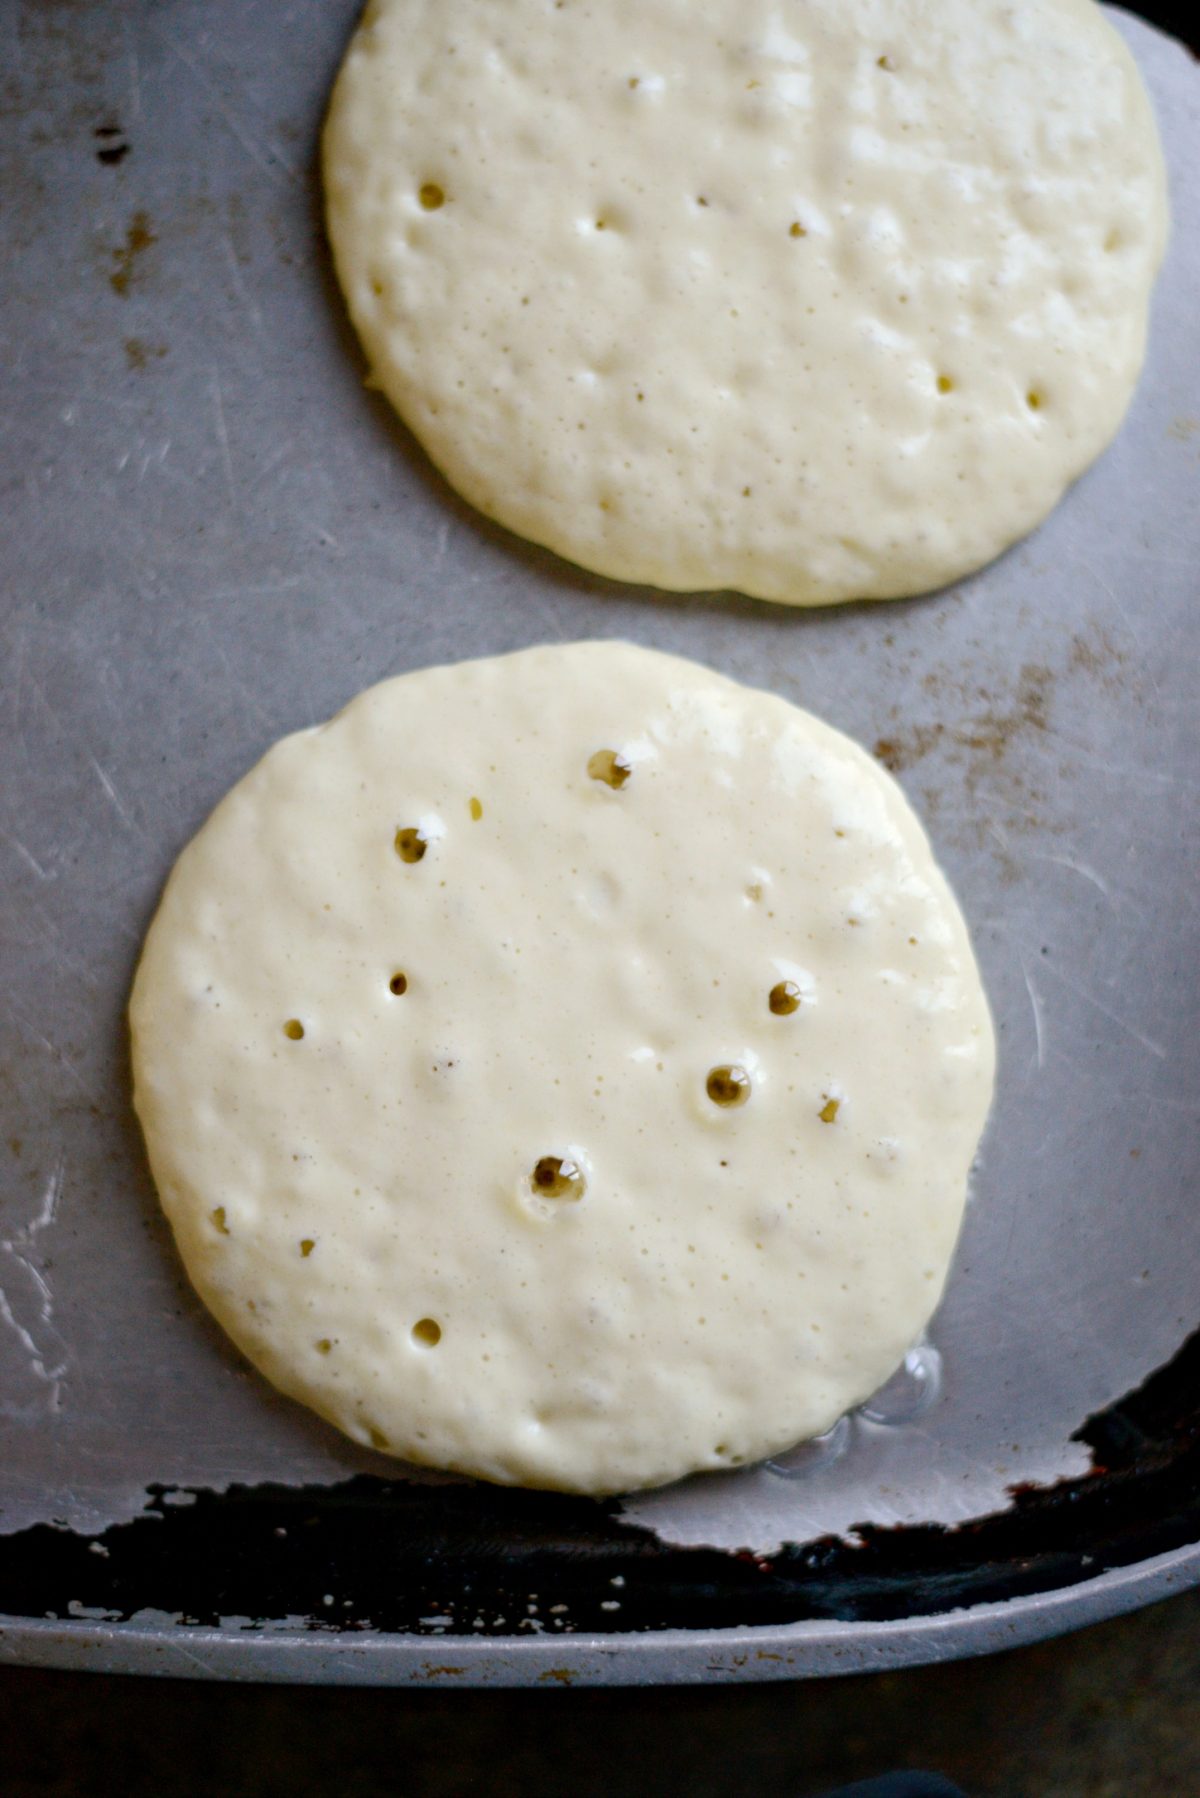 Pour batter onto preheated griddle